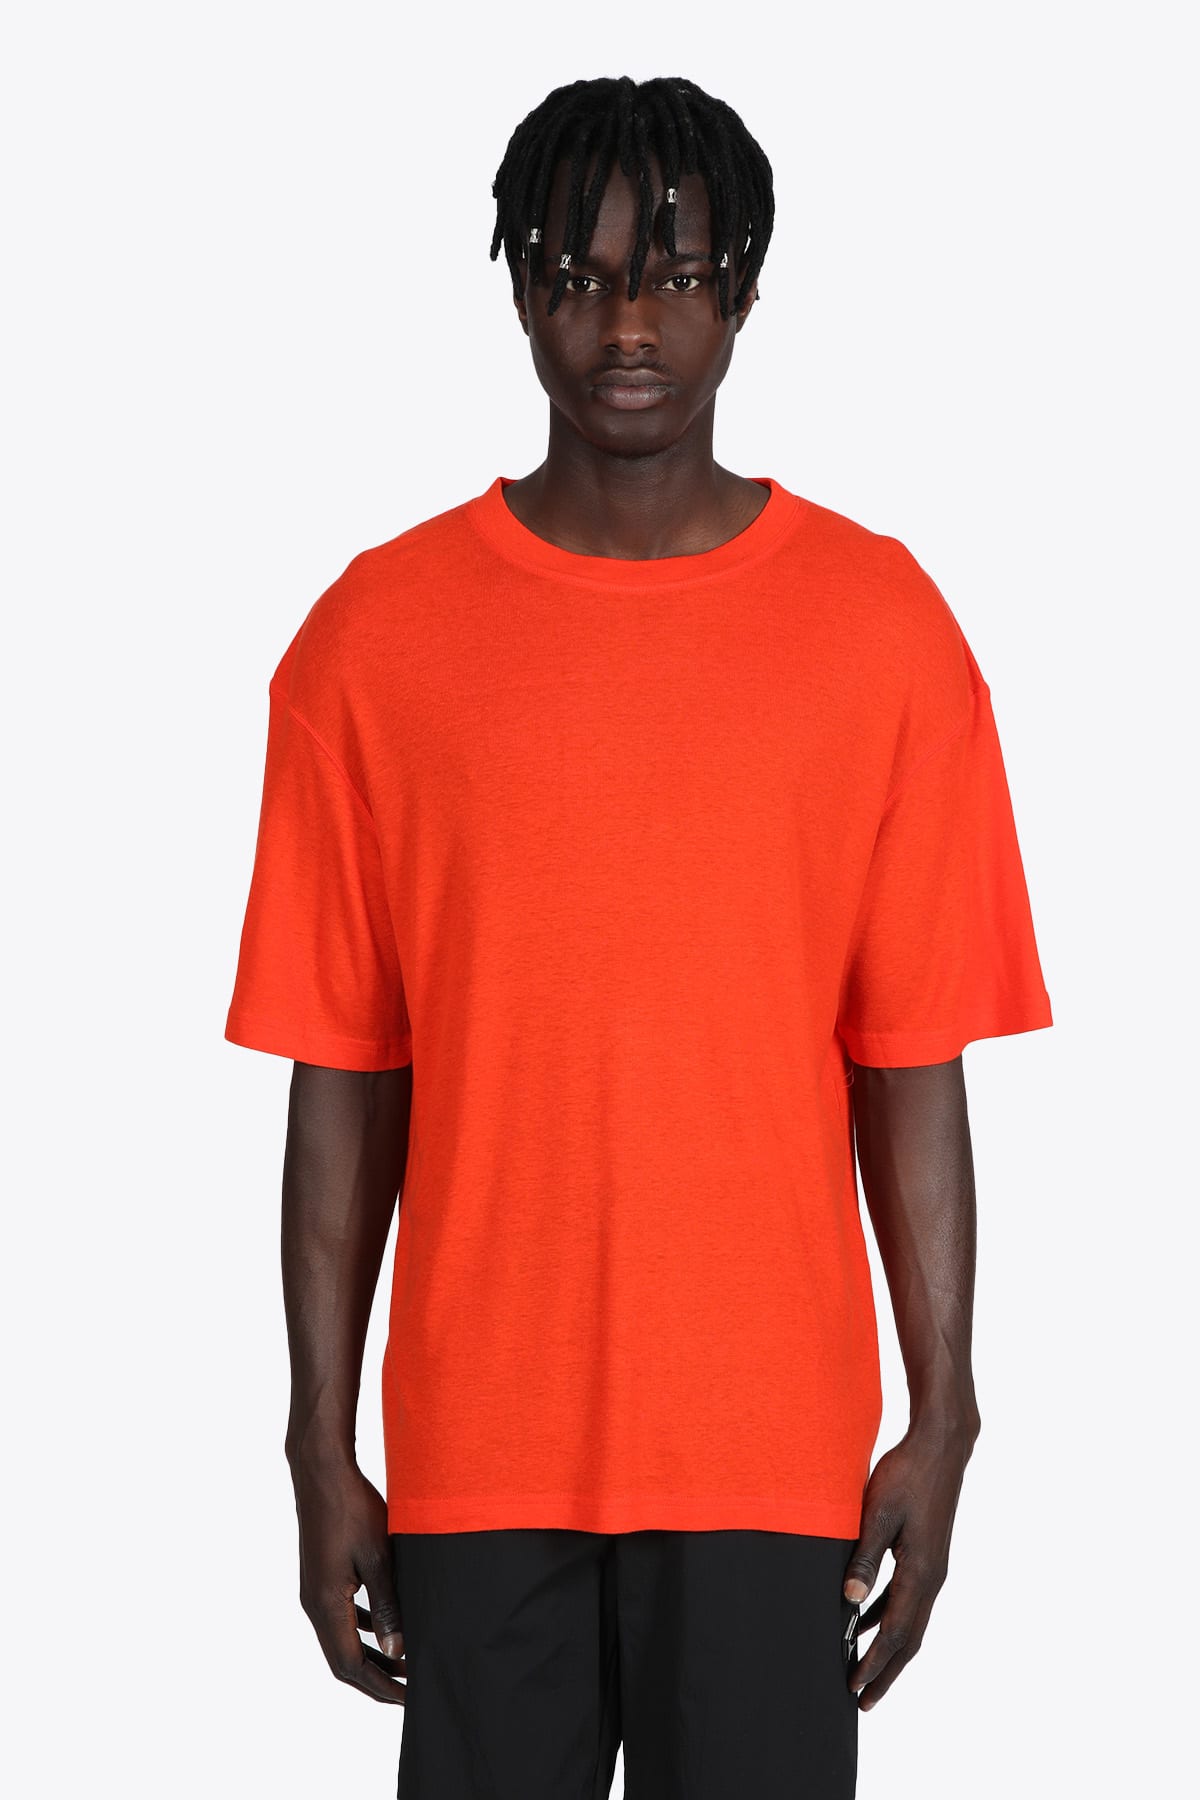 A-COLD-WALL Knitted Artisan Light T-shirt Orange knitted t-shirt with back print